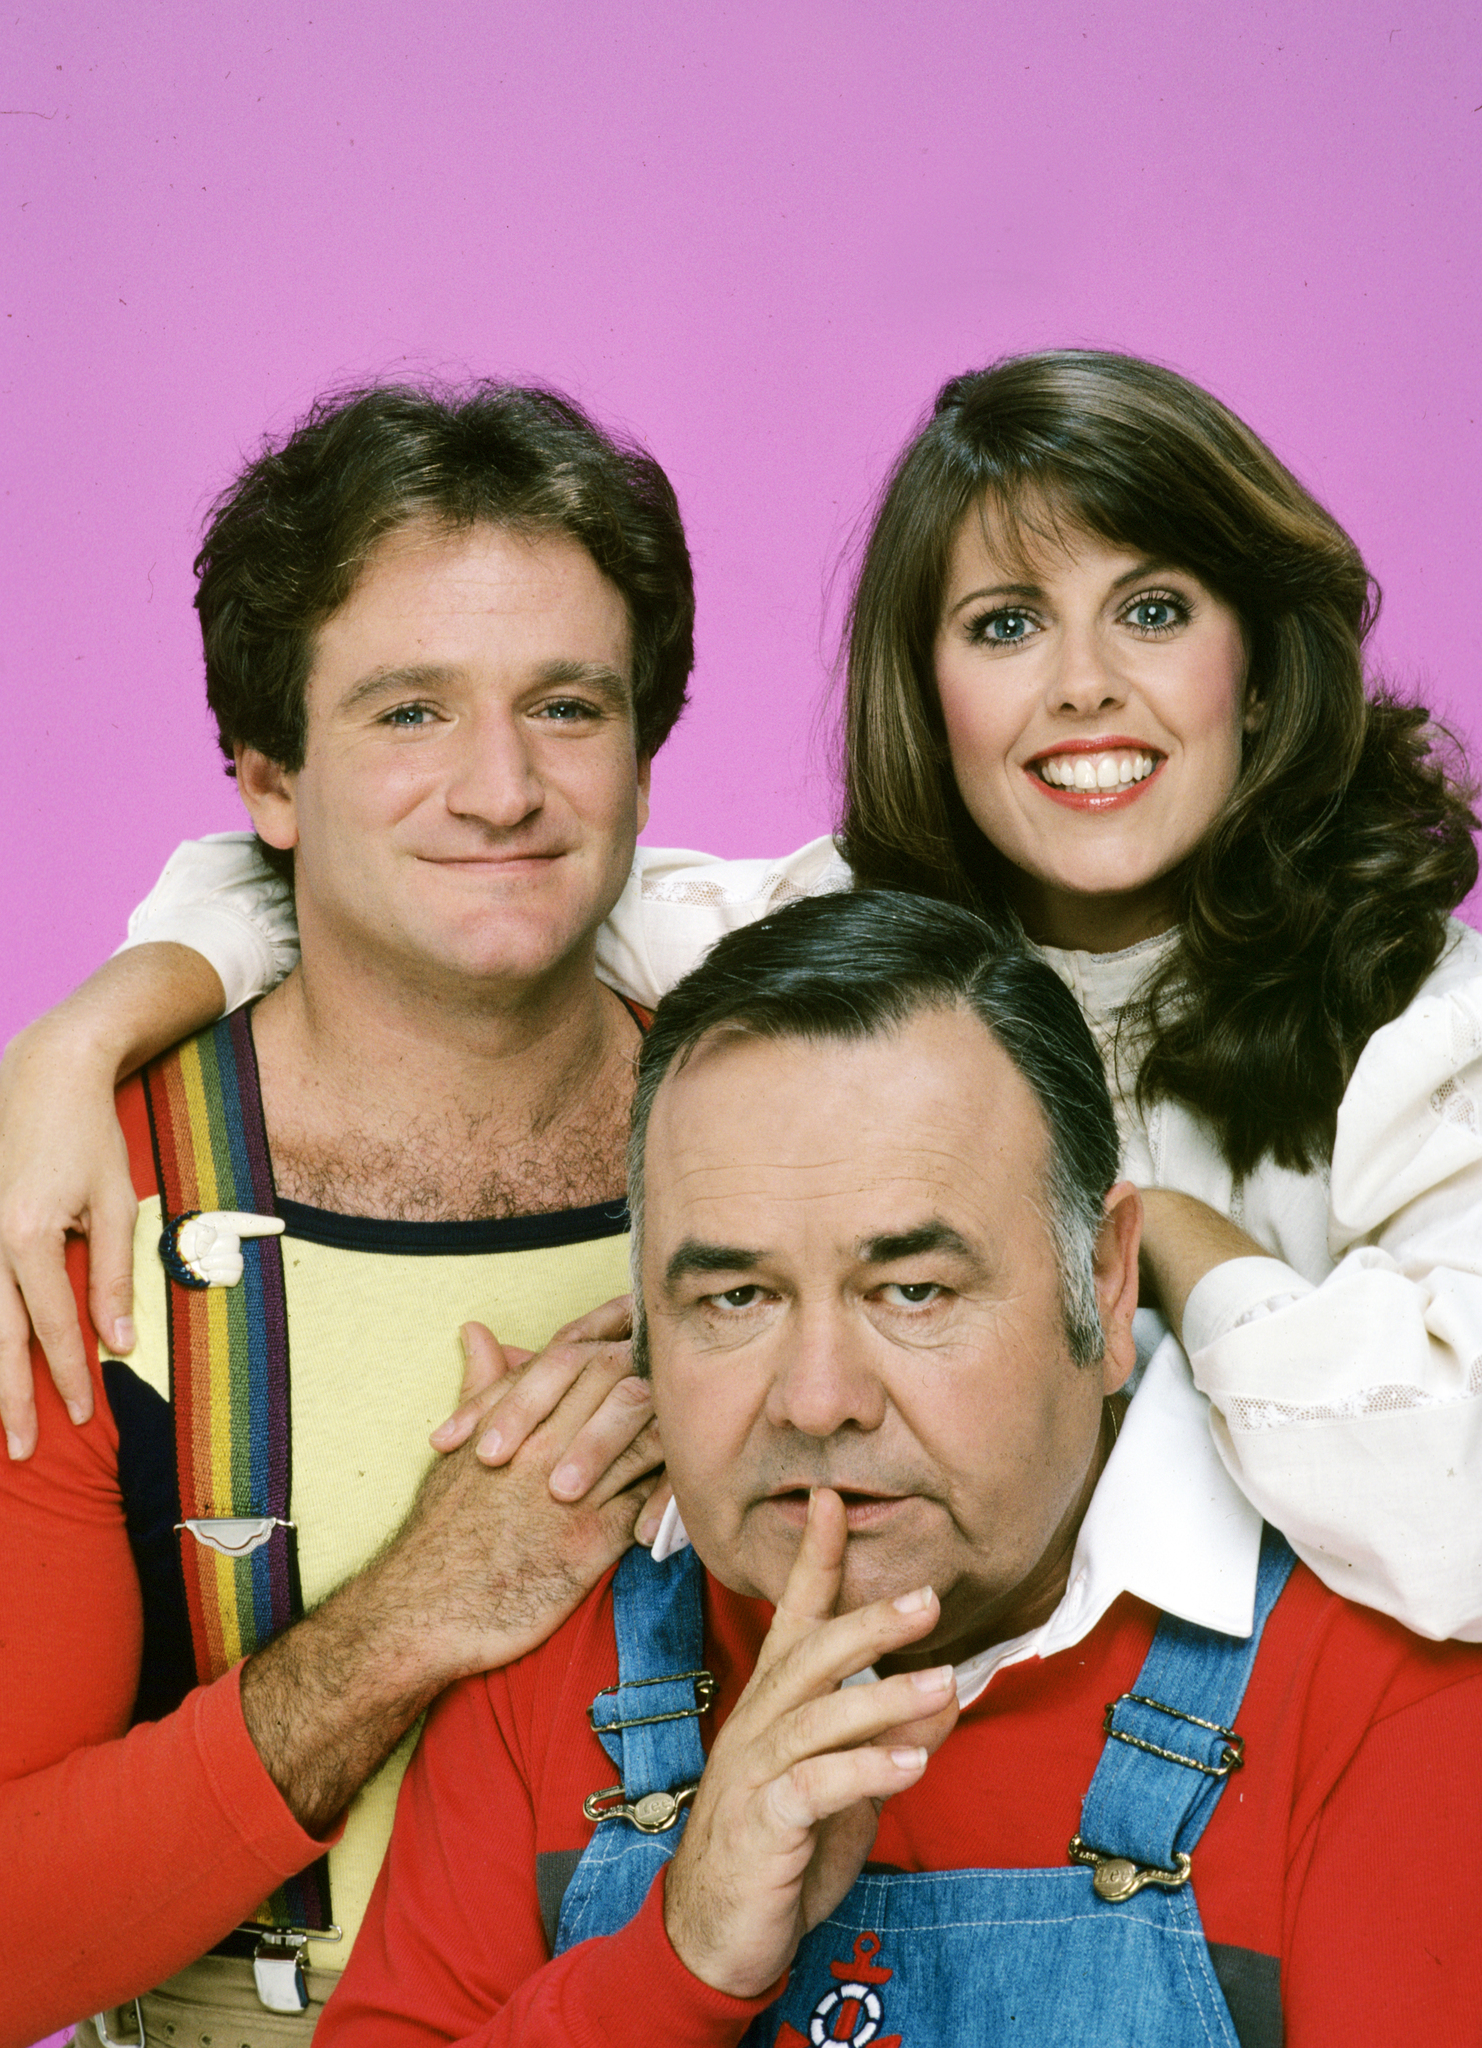 Pam Dawber and Jonathan Winters at event of Mork & Mindy (1978)